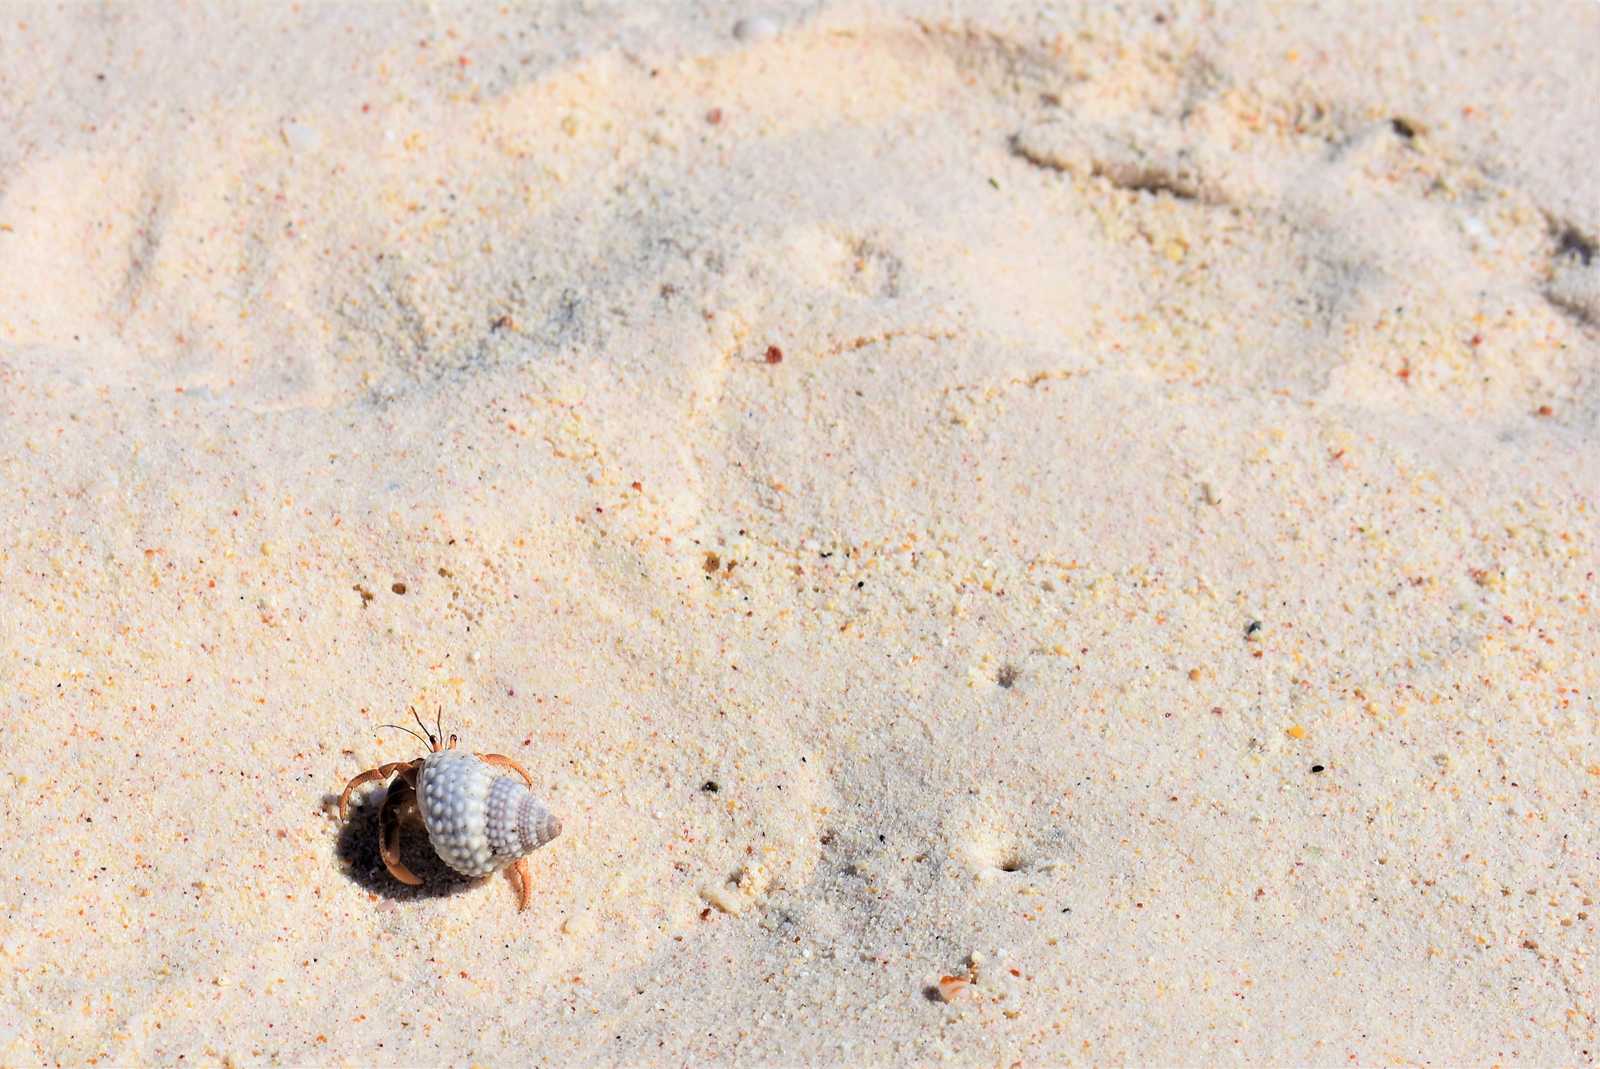 A solitary hermit crab on some sand